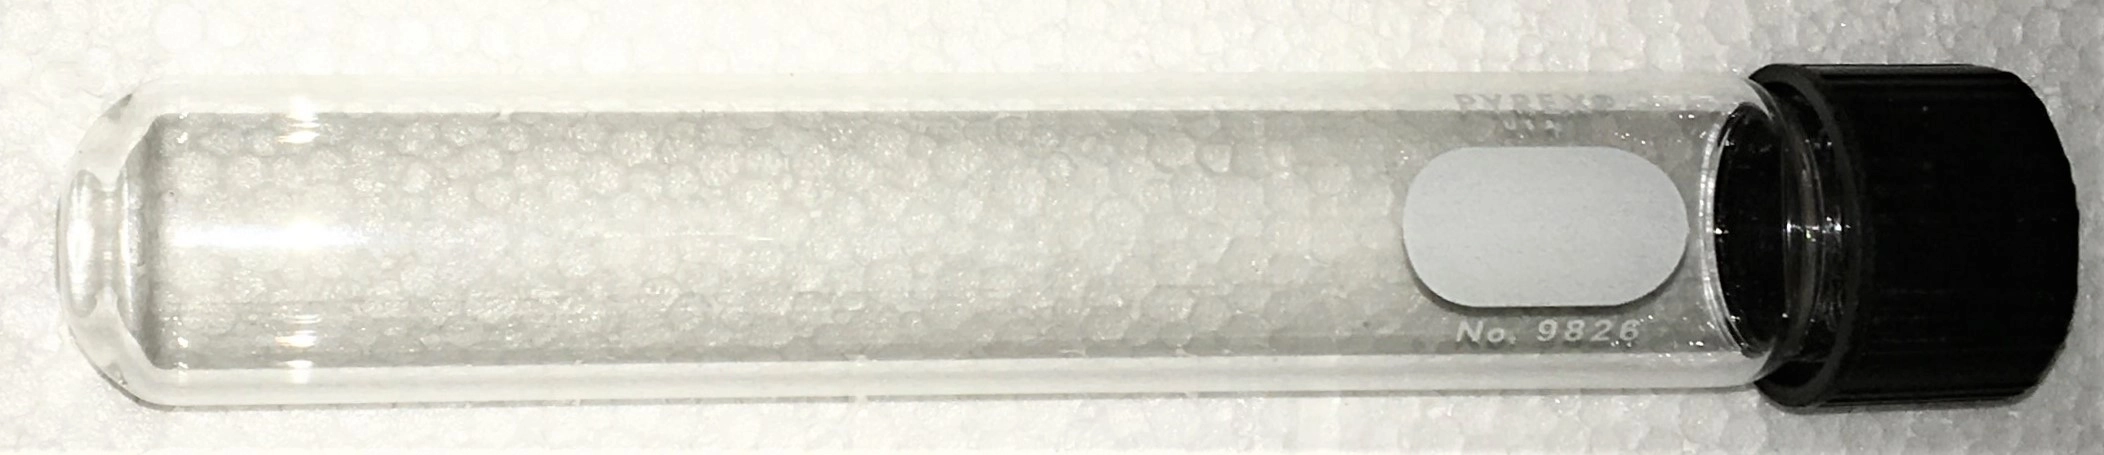 Corning PYREX 9826-25 Tubes with Caps (Pack of 48) - 25mm x 150mm